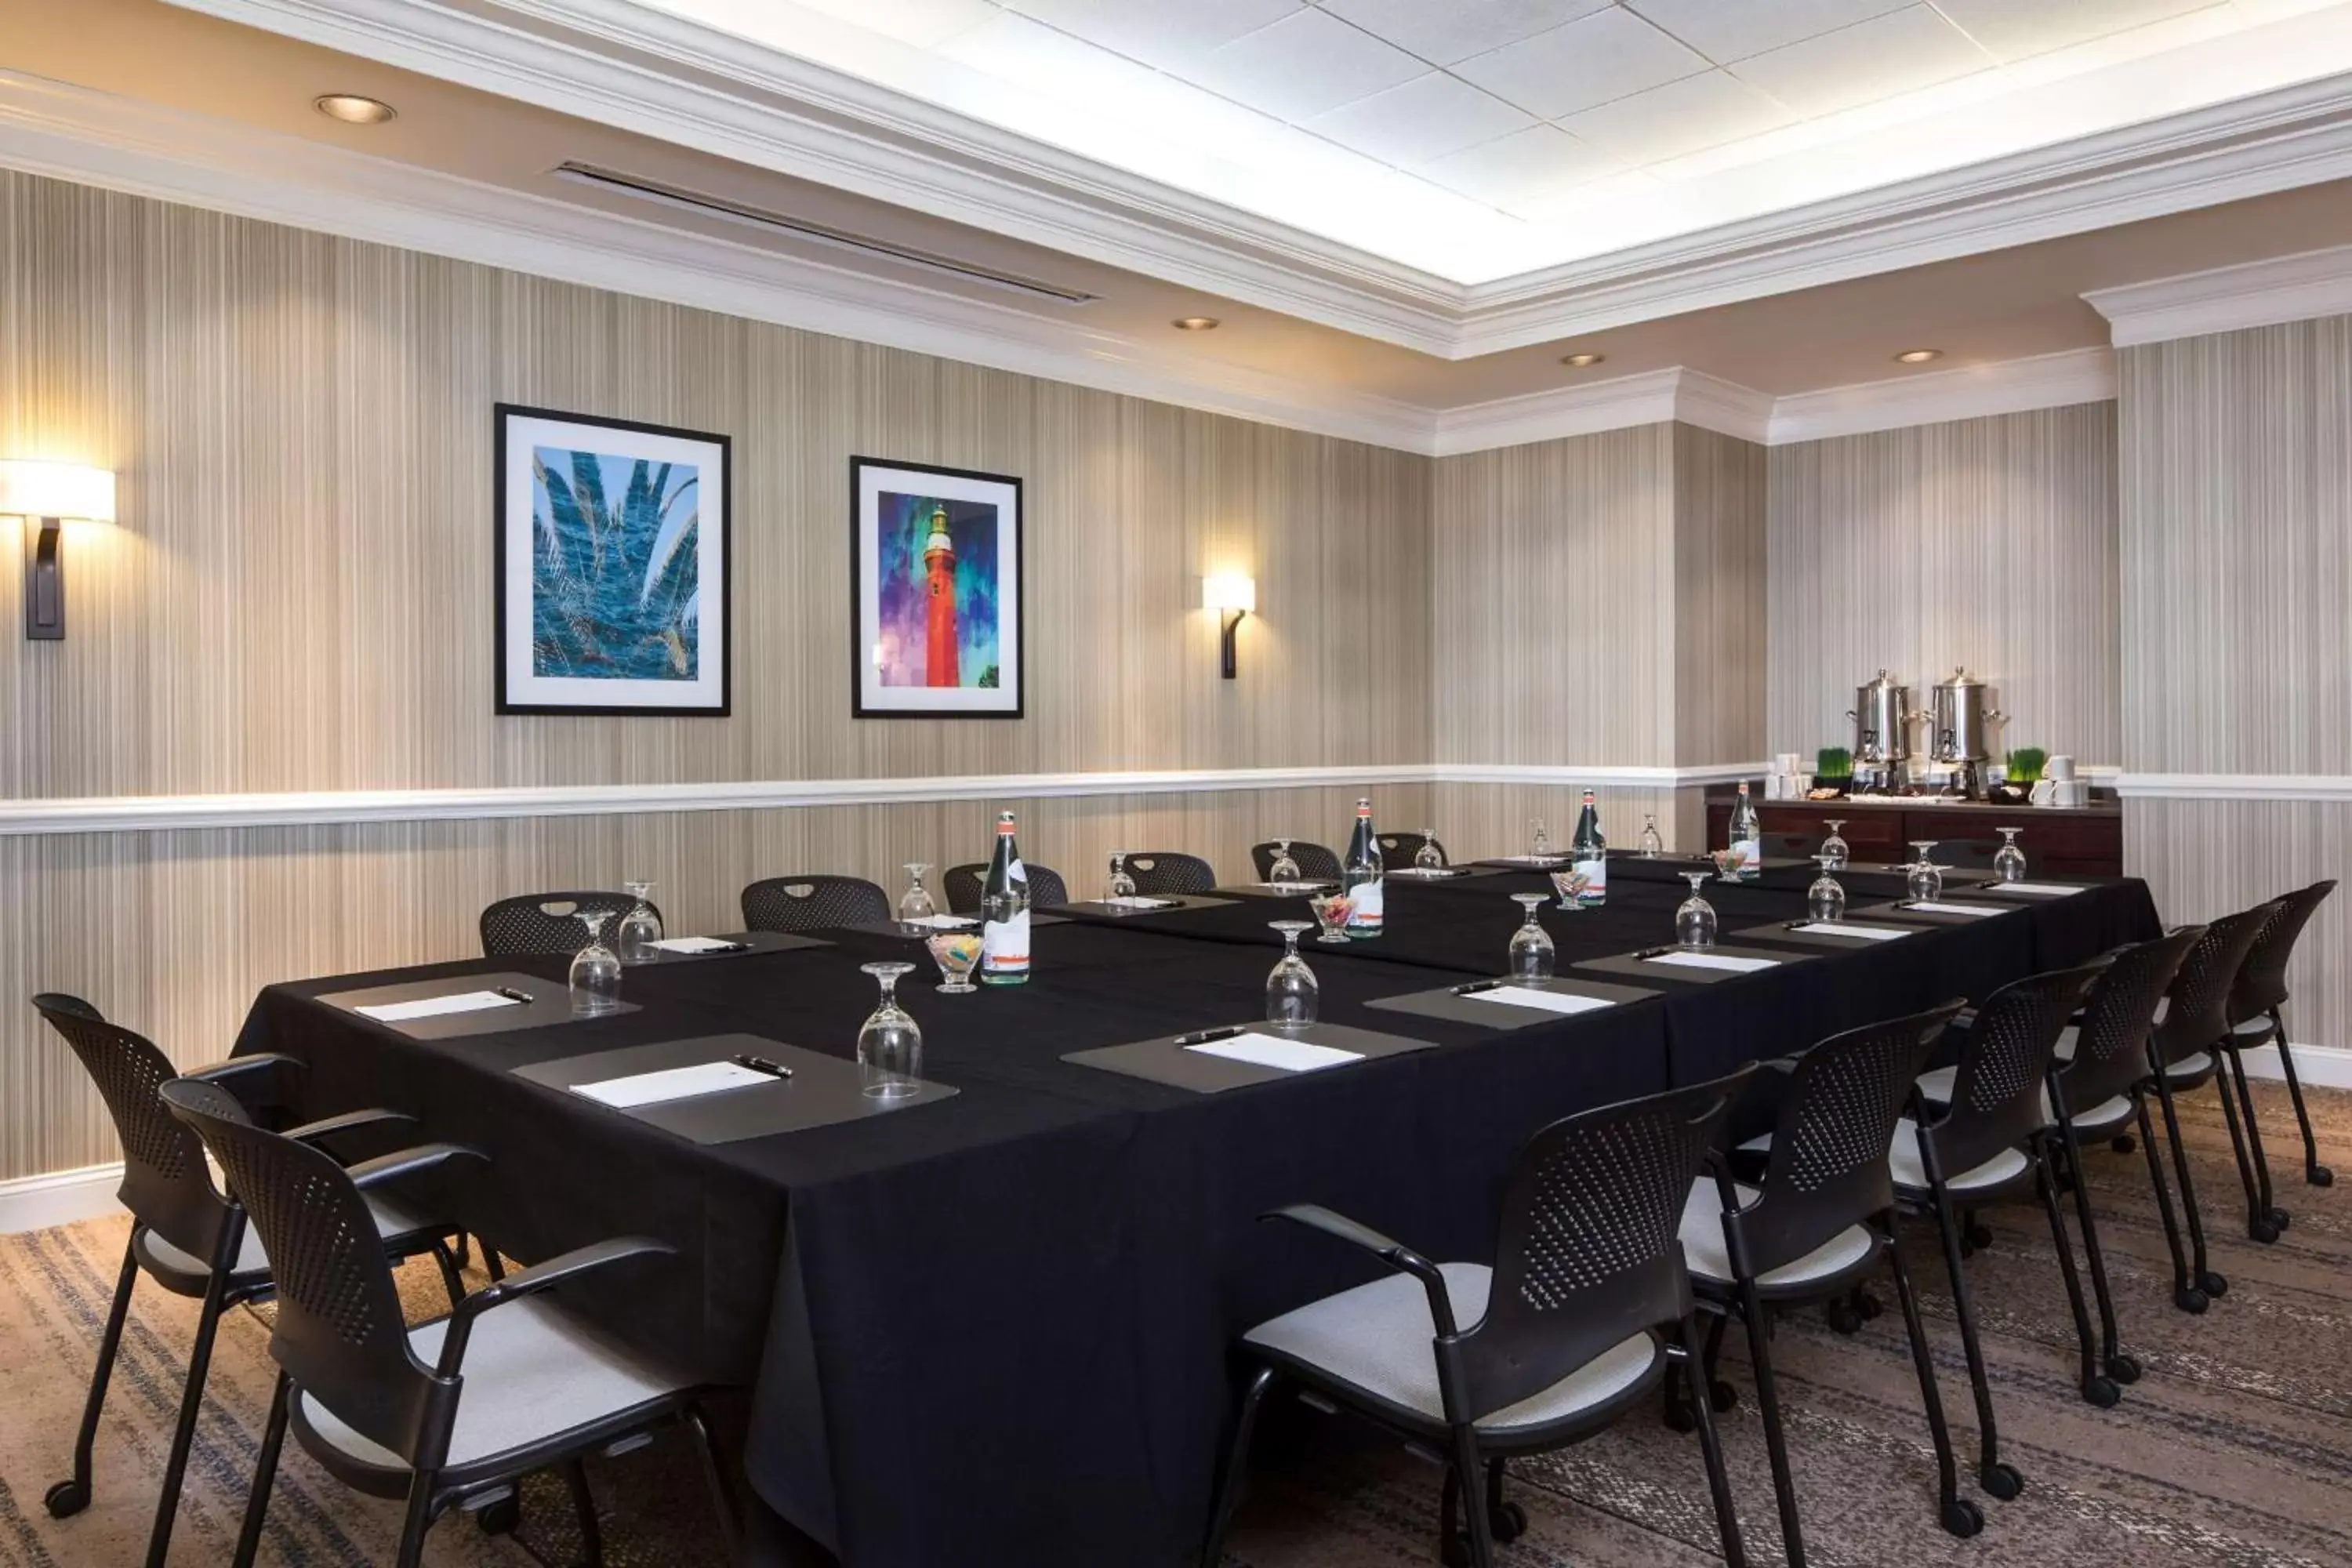 Meeting/conference room in DoubleTree by Hilton Jacksonville Riverfront, FL